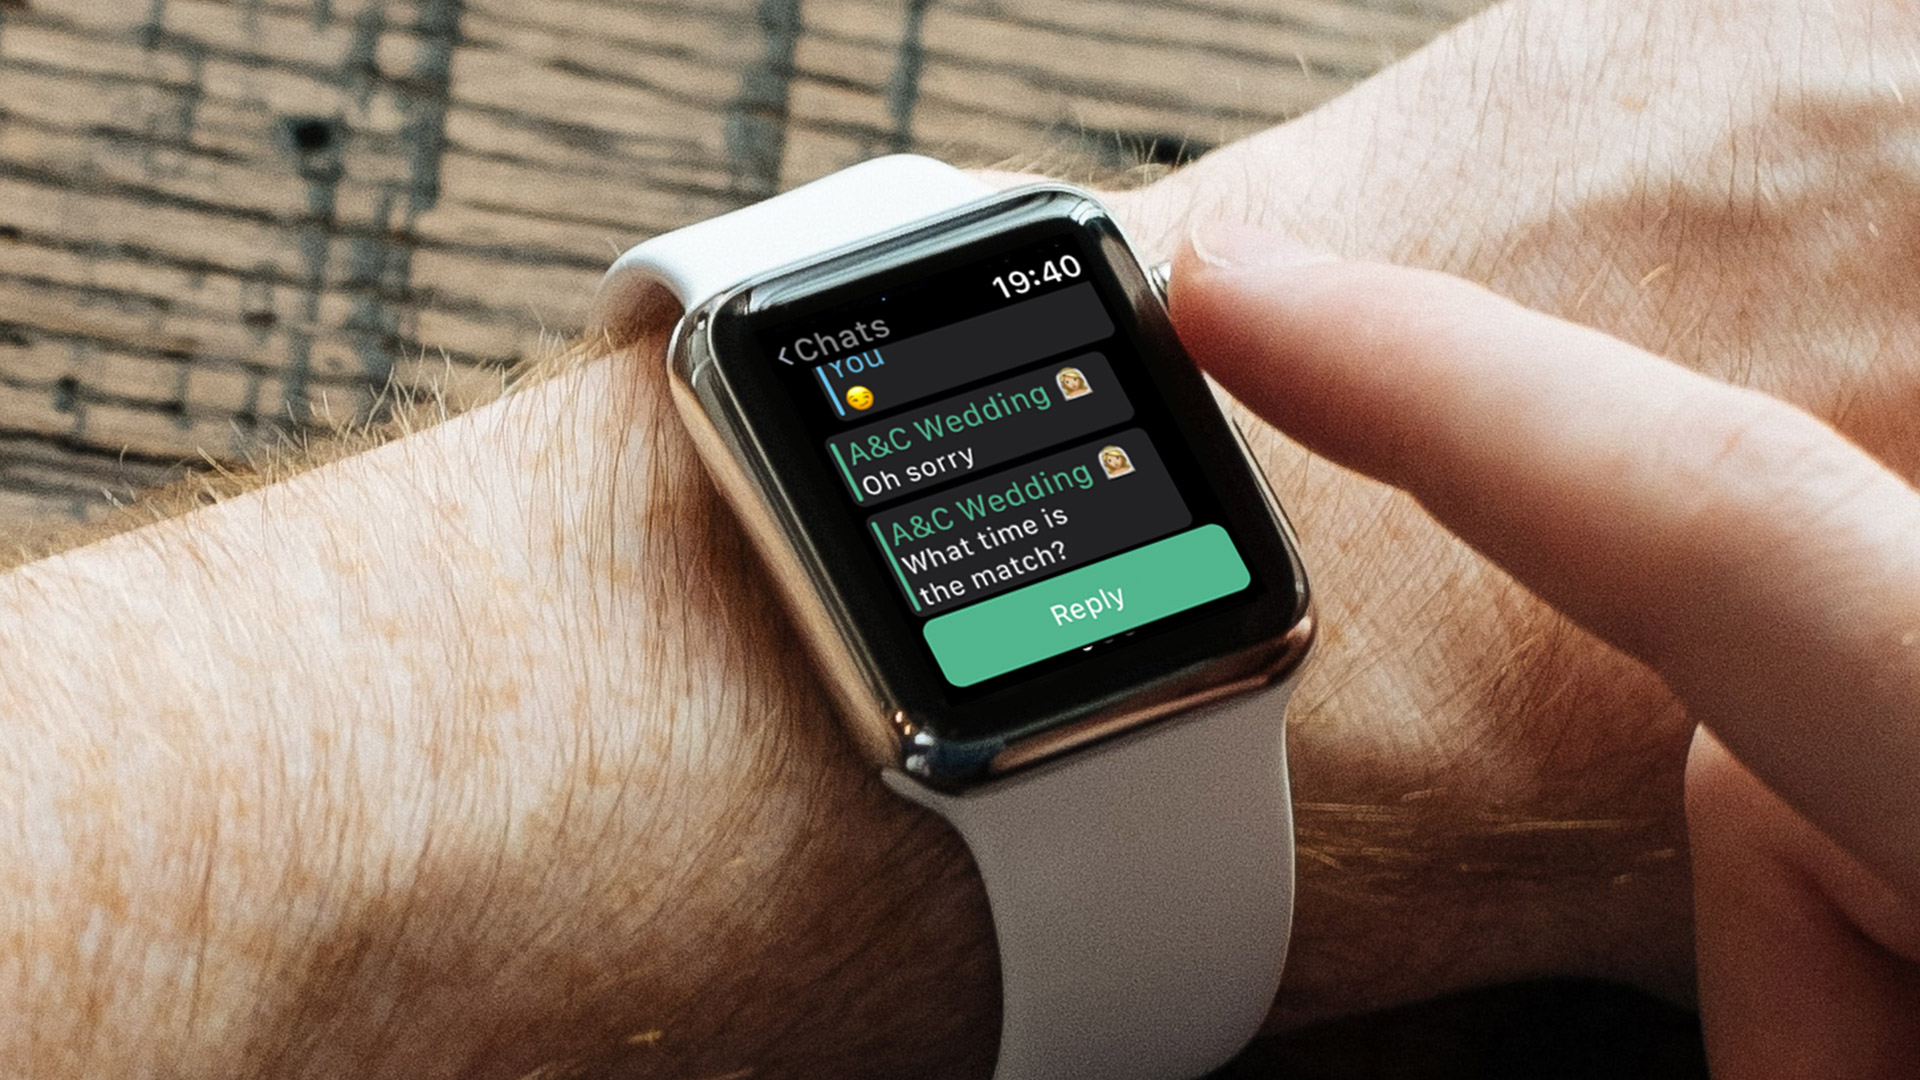 whatsapp for iwatch